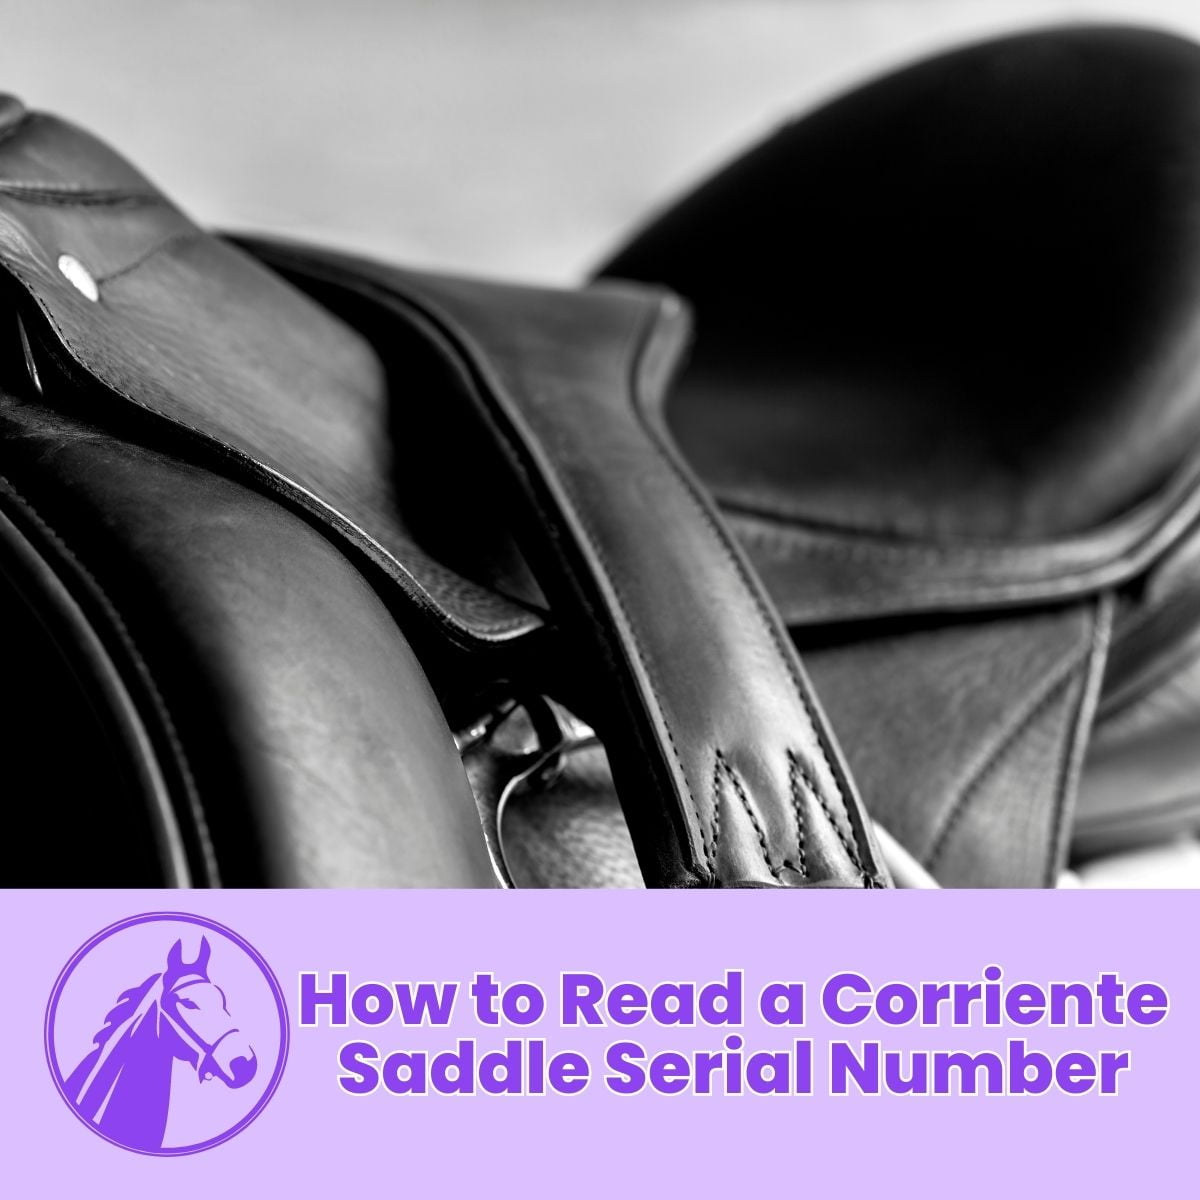 You are currently viewing How to Read a Corriente Saddle Serial Number